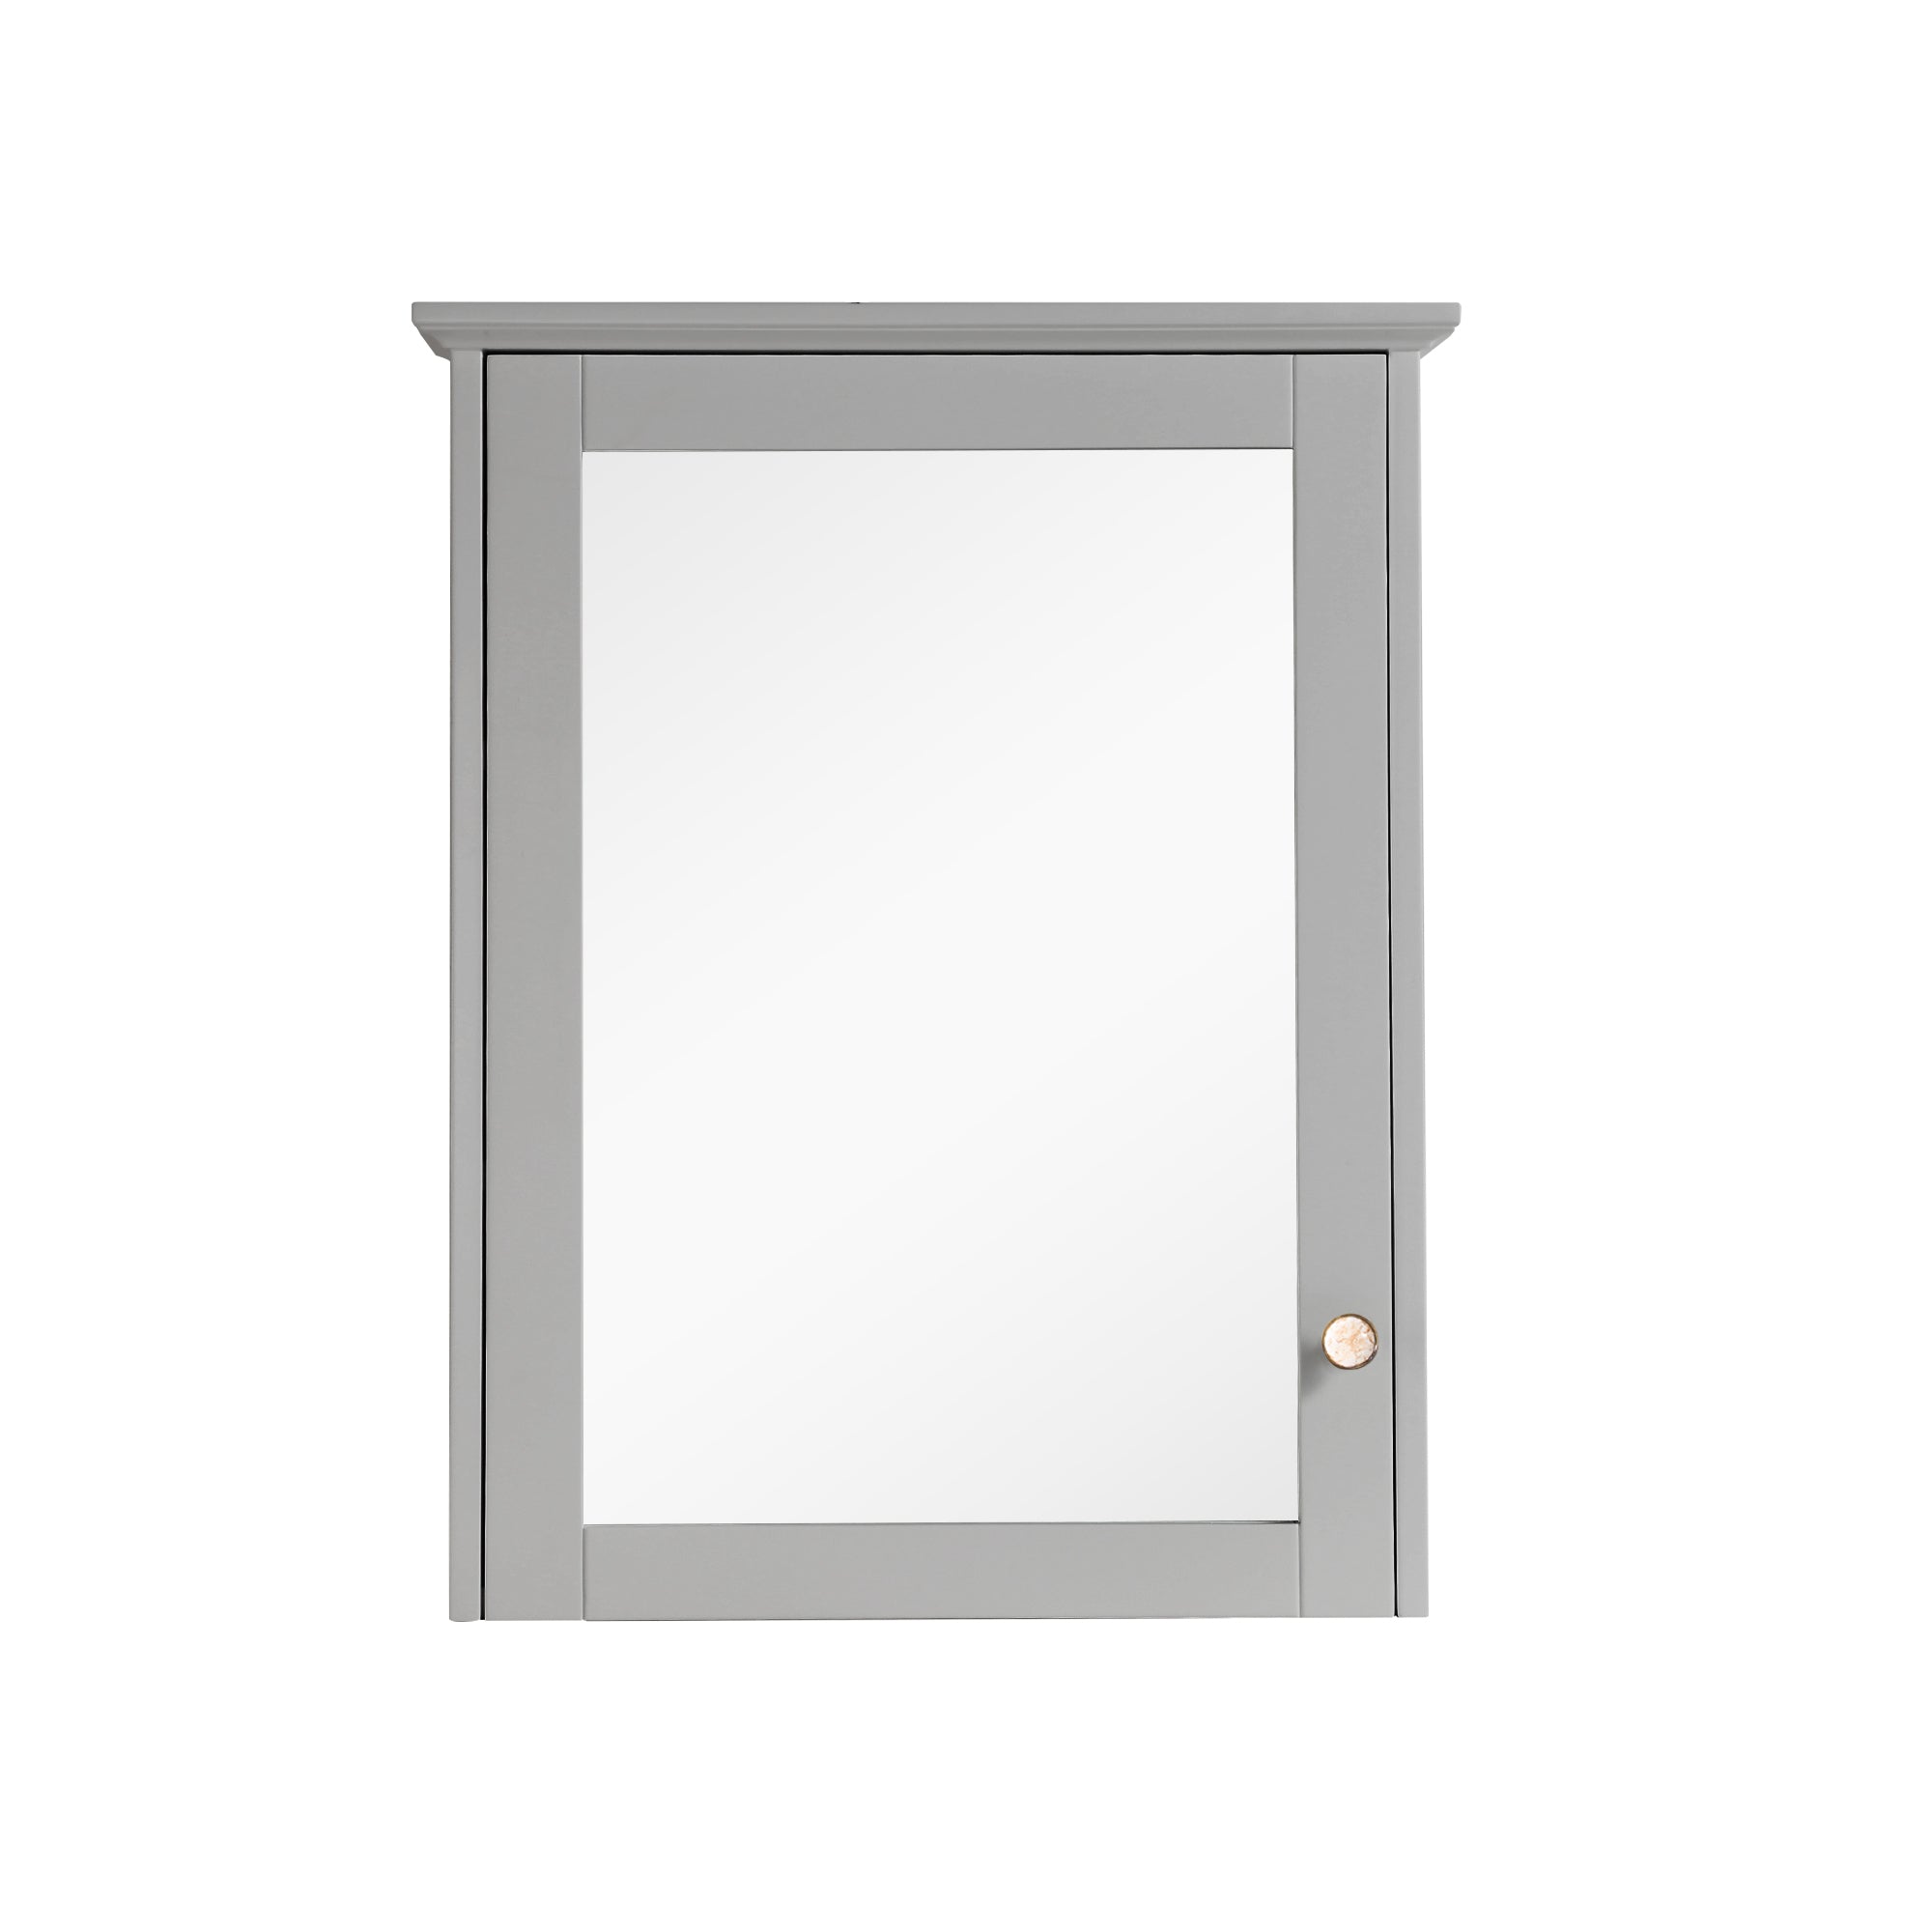 24 in. W x 30 in. H Medium Rectangular Wood Frame Surface Mount Soft Close Medicine Cabinet with Mirror